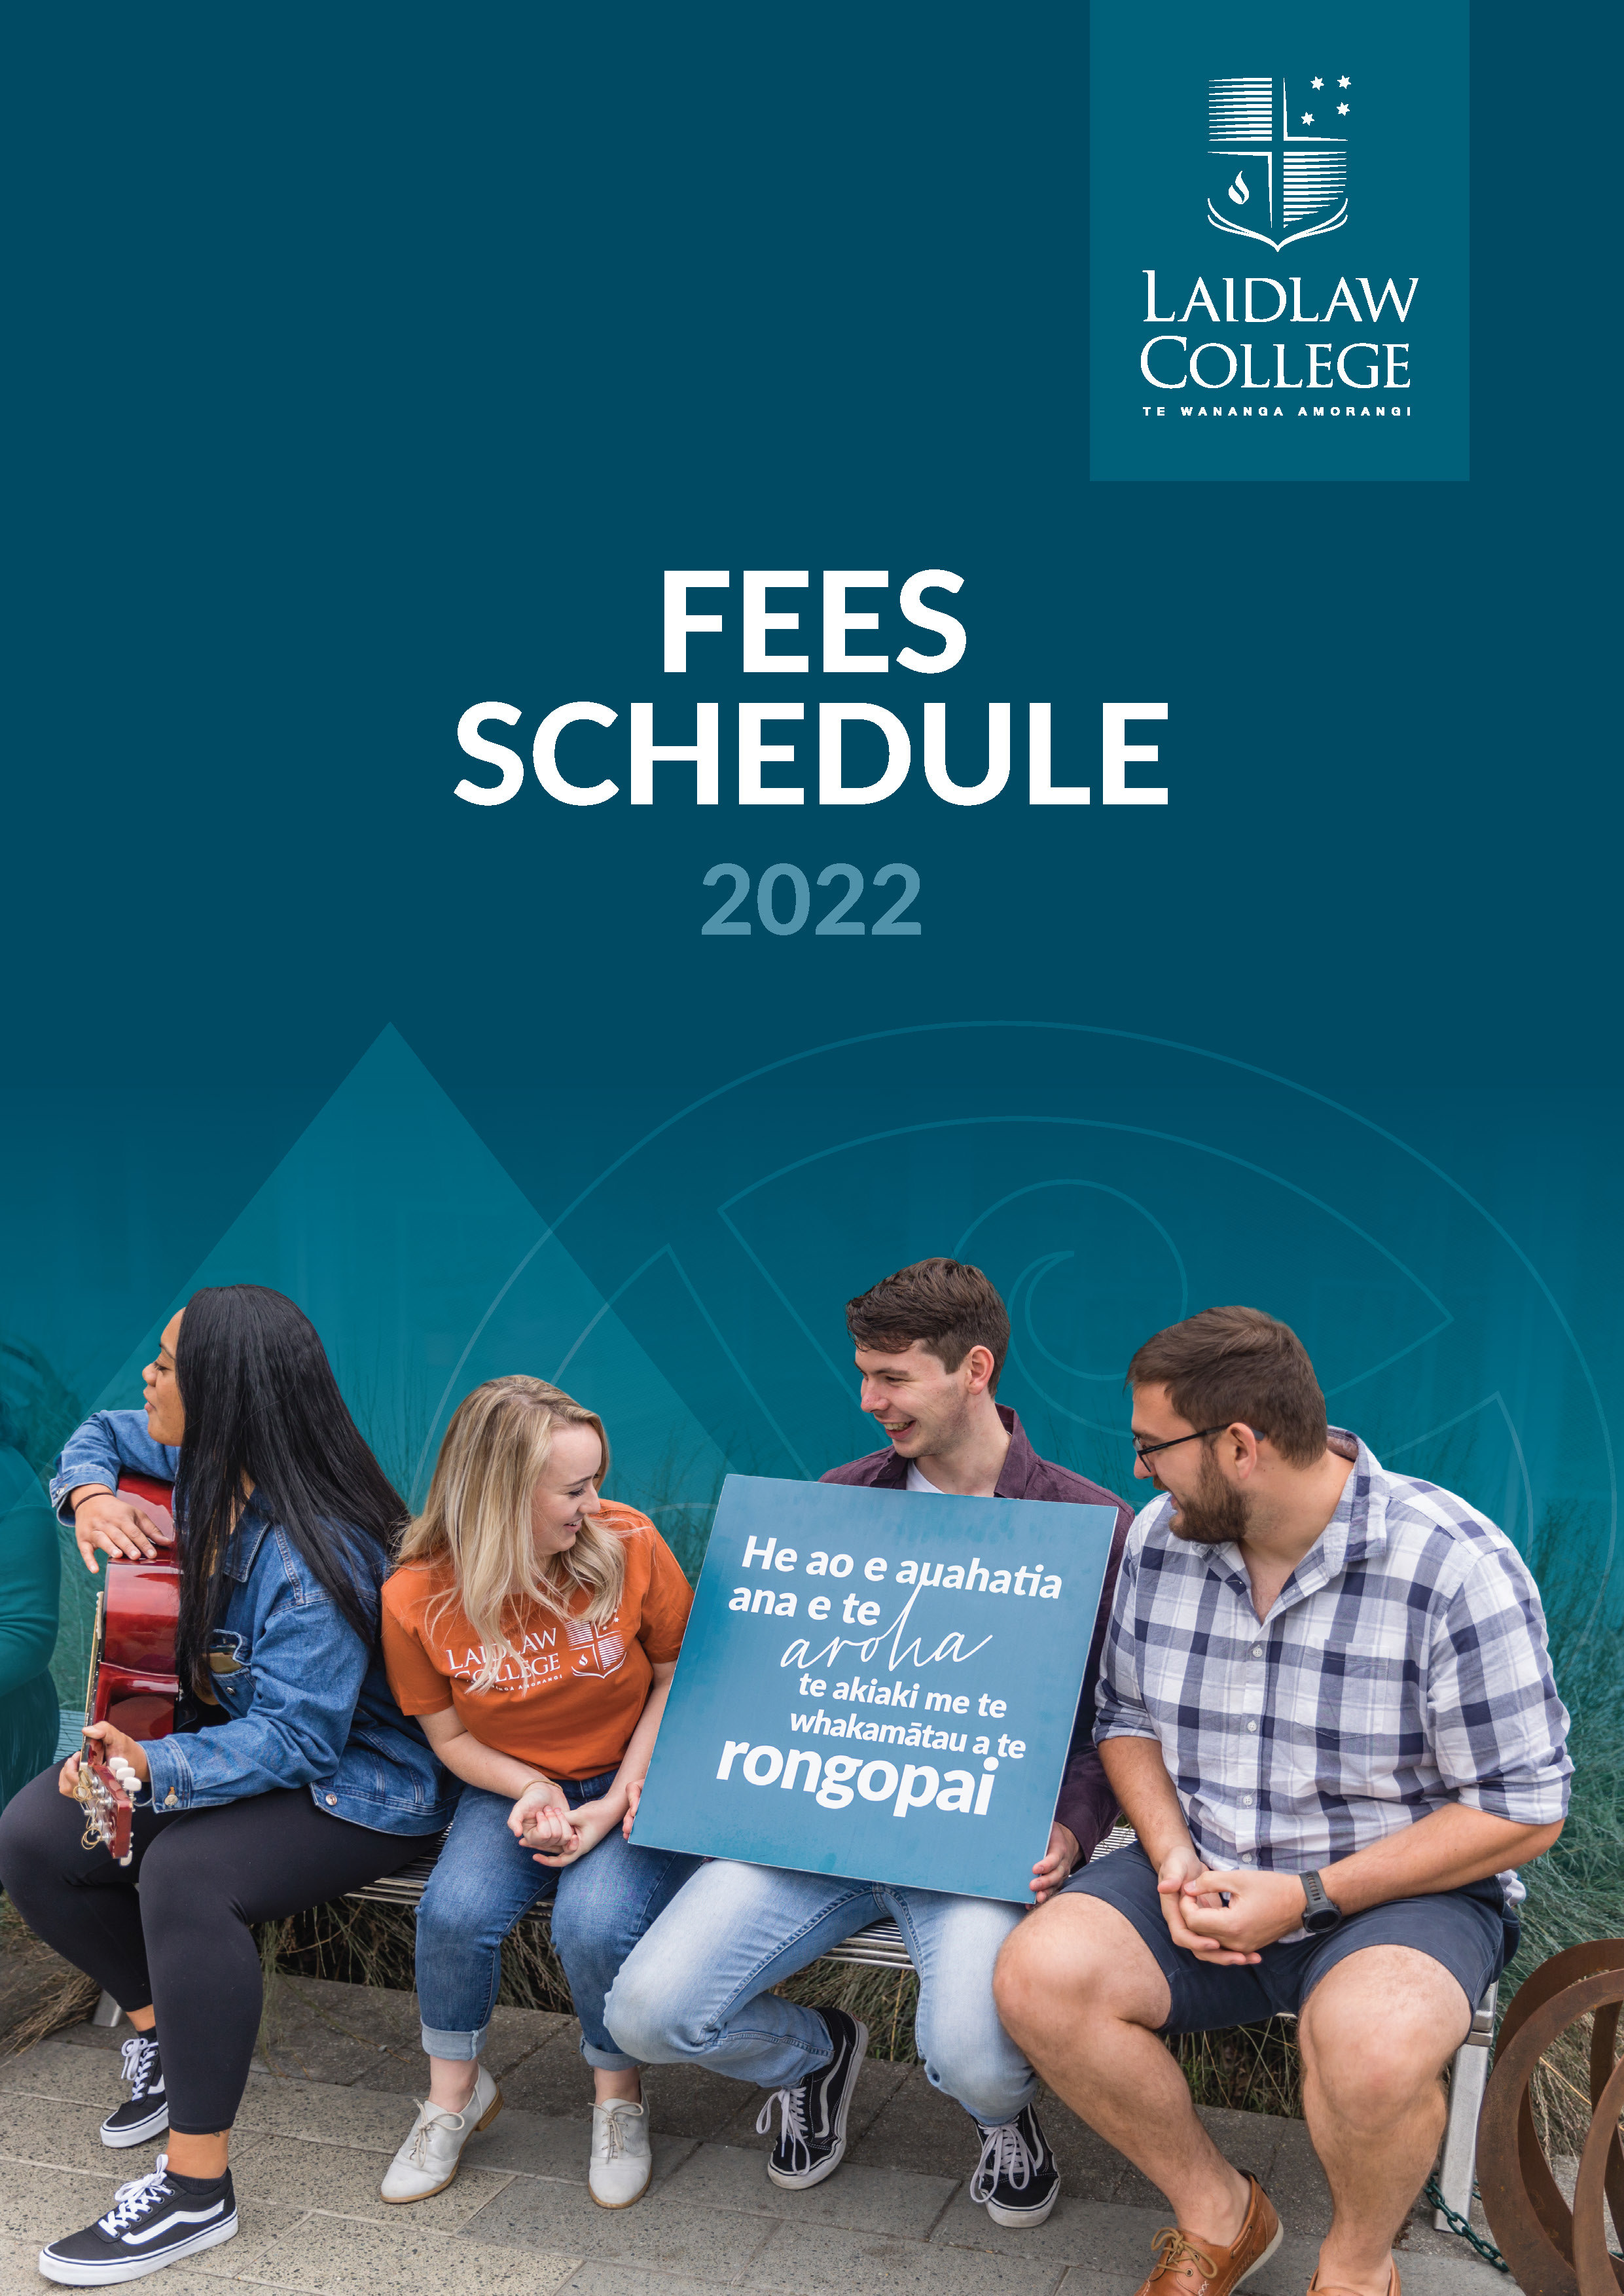 Fees Schedule 2022